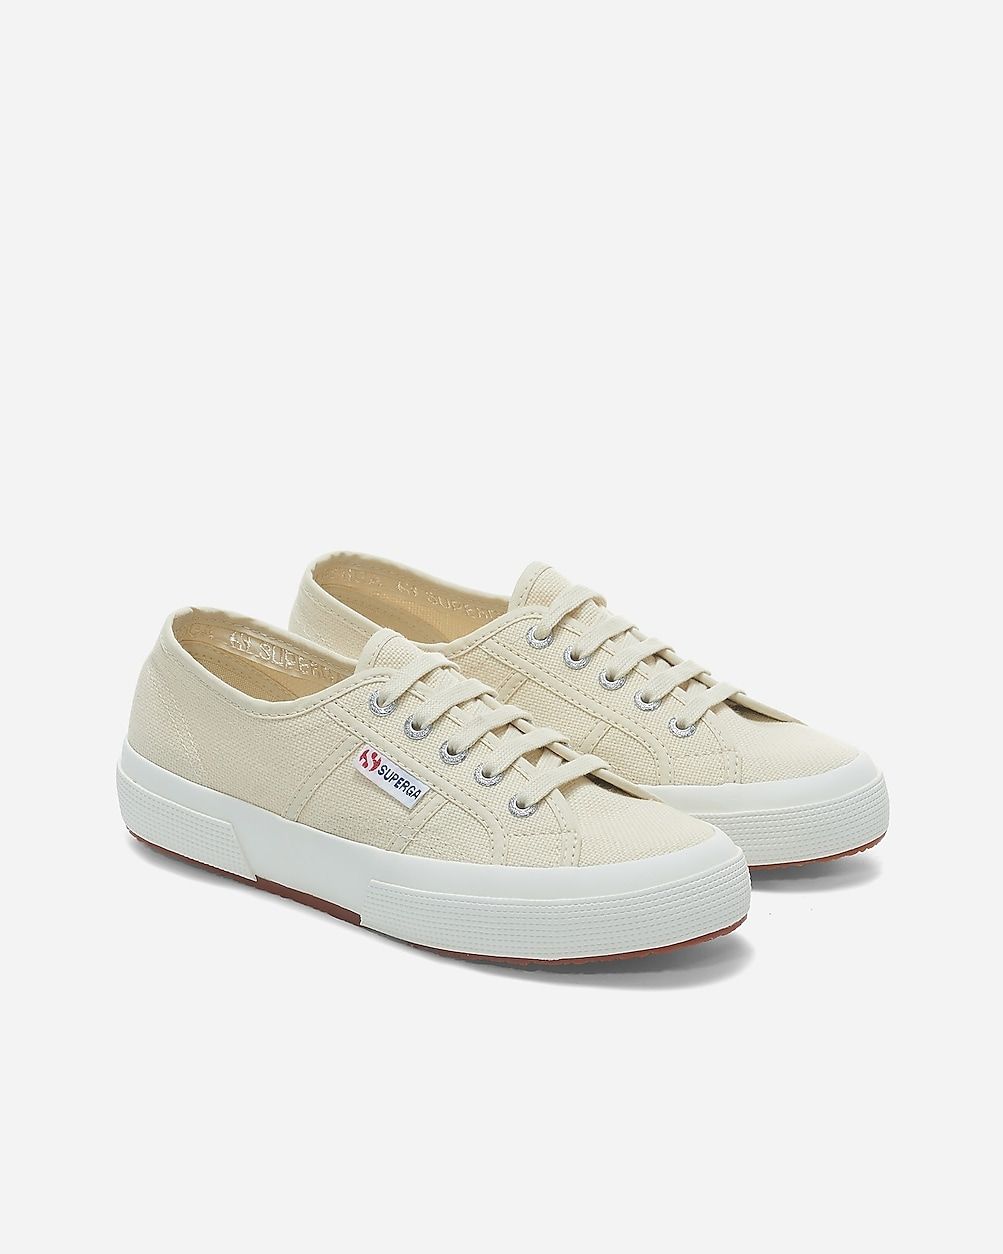 How to wear itSuperga® women's 2750 Cotu sneakersSold & Shipped by SUPERGAJ.Crew MarketplaceThis... | J.Crew US